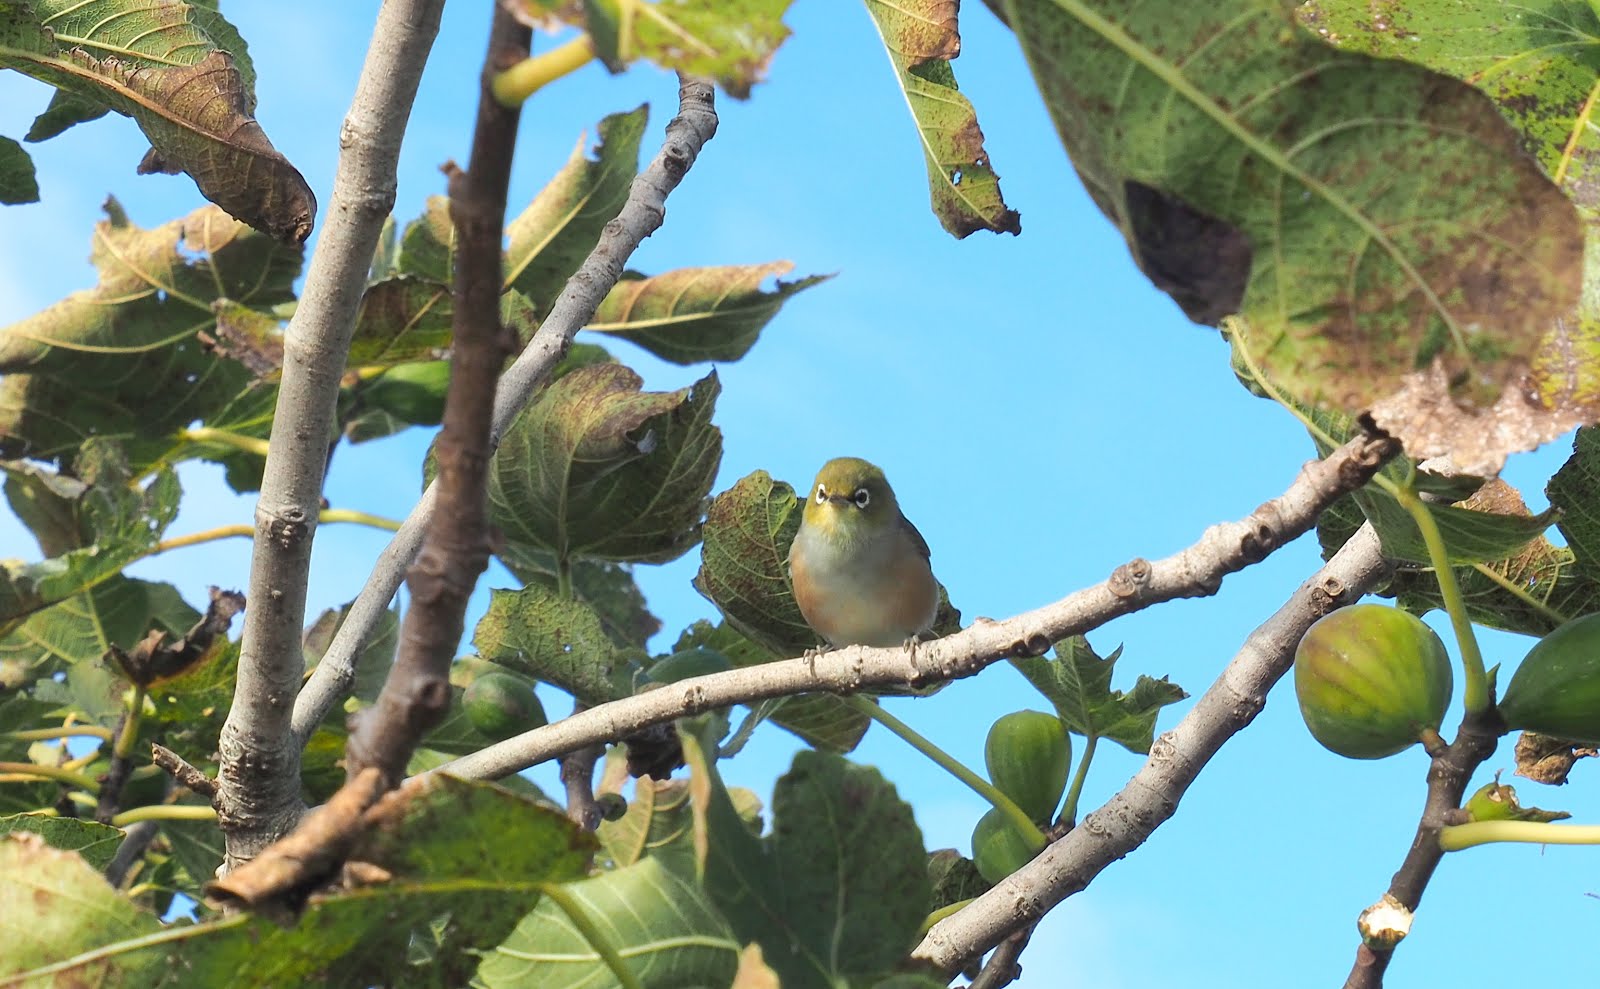 Silvereye in the fig tree